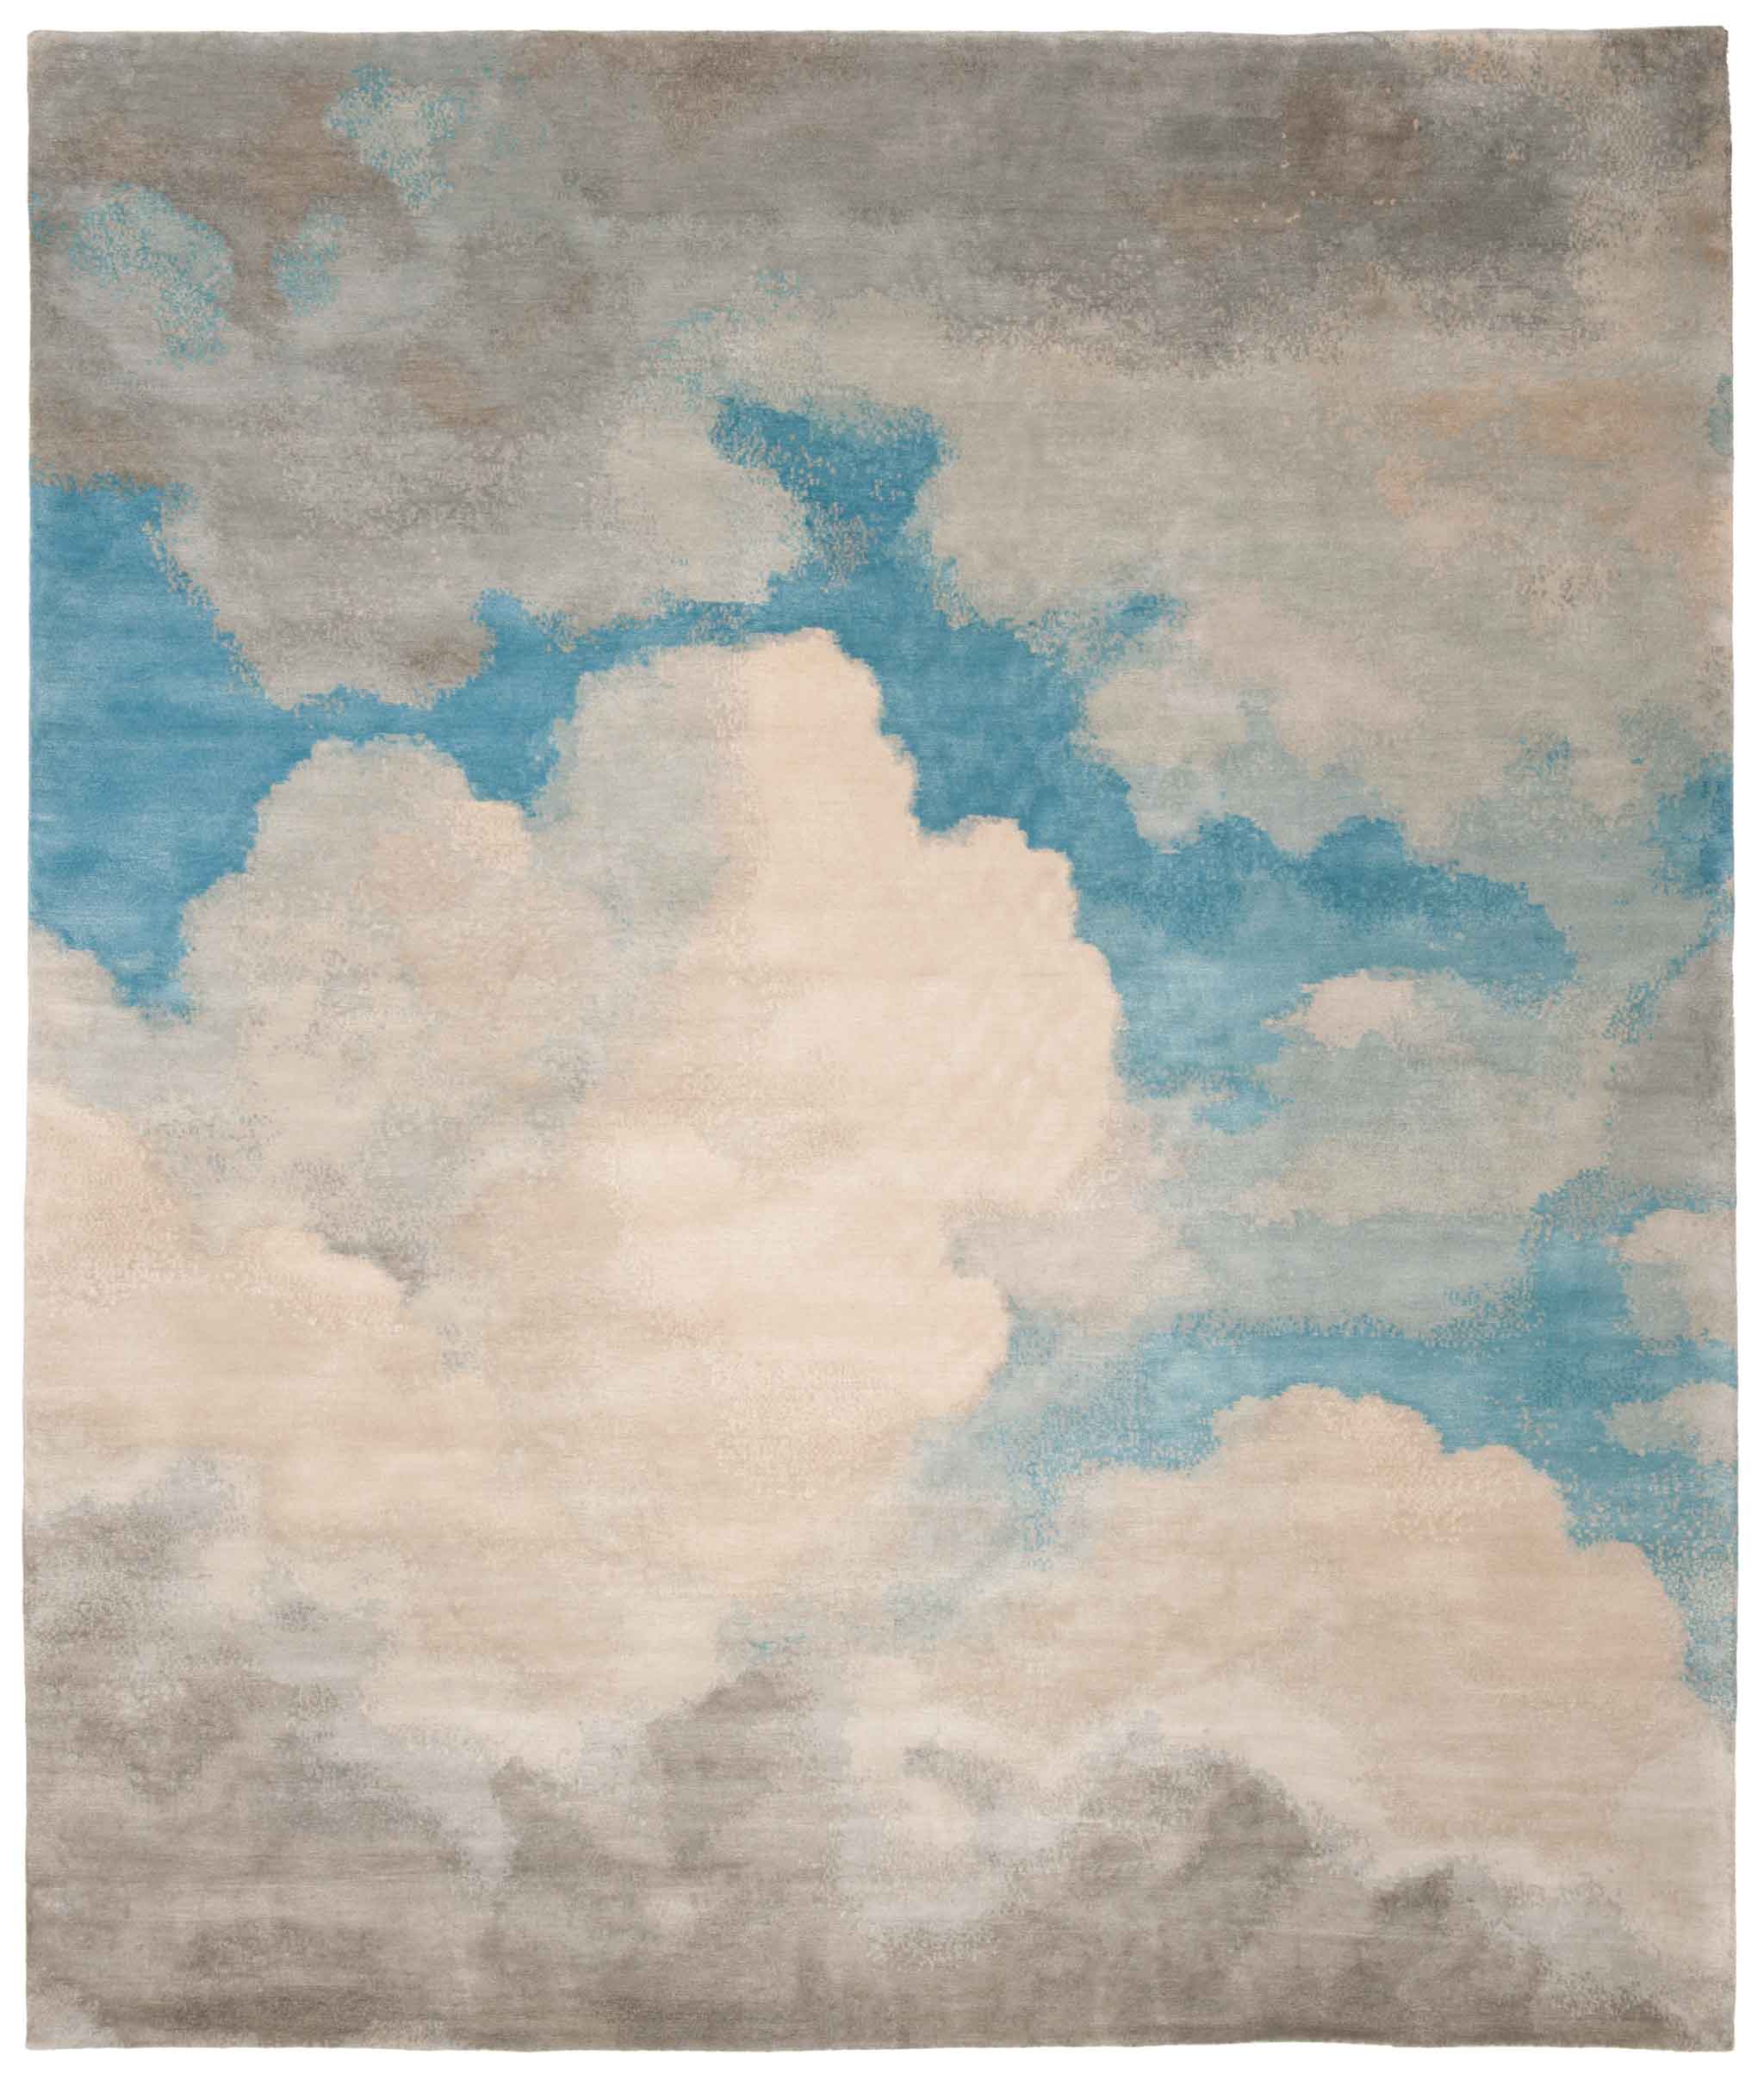 'Cloud' from the 'Heiter bis Wolkig' Collection from Jan Kath. 'Heiter bis wolkig' translates as 'partly cloudy' in English. | Image courtesy of Jan Kath